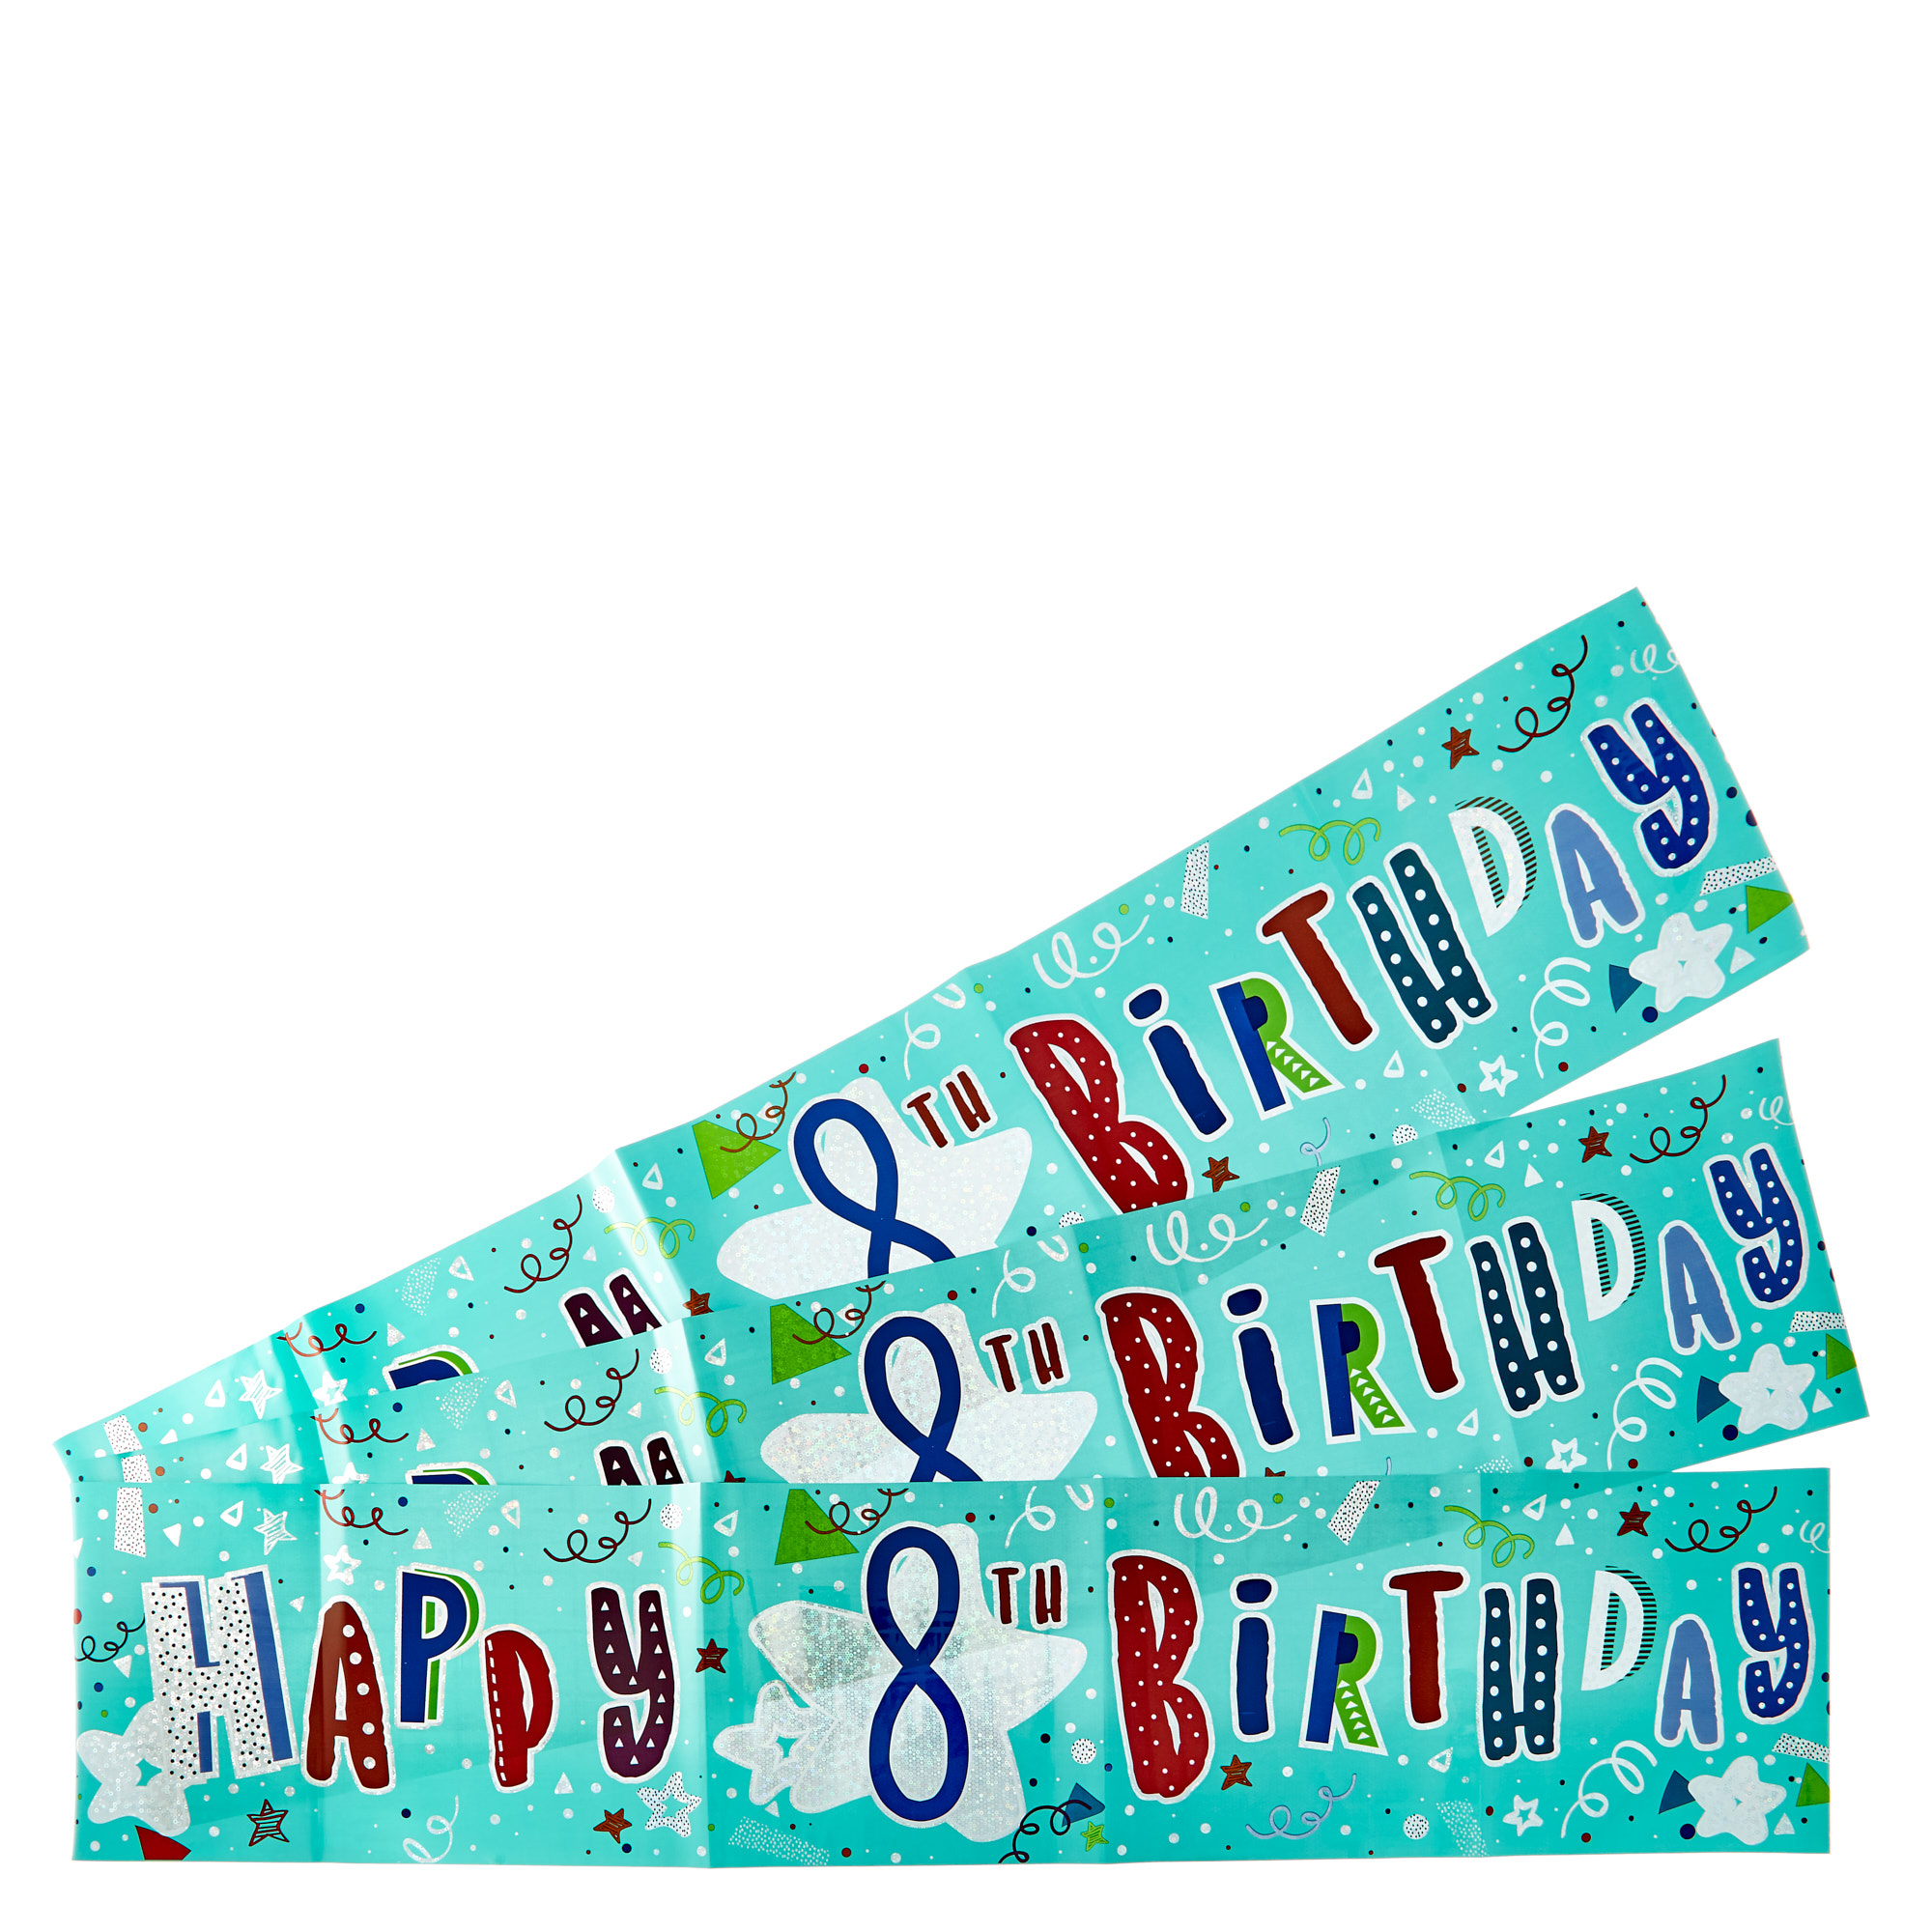 Holographic 8th Birthday Party Banners - Pack Of 3 